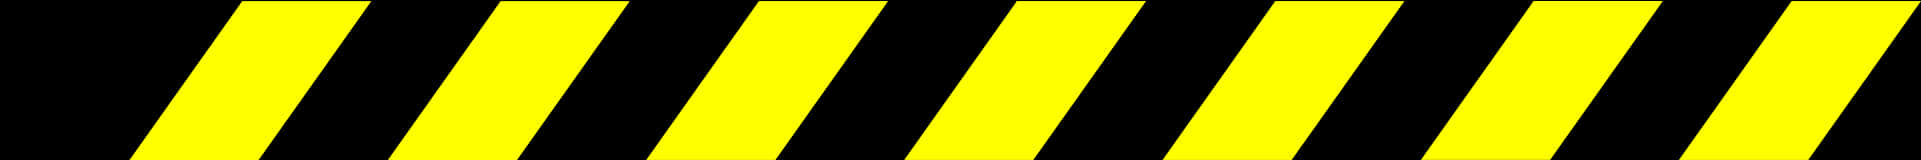 Yellow Black Striped Caution Tape Background PNG